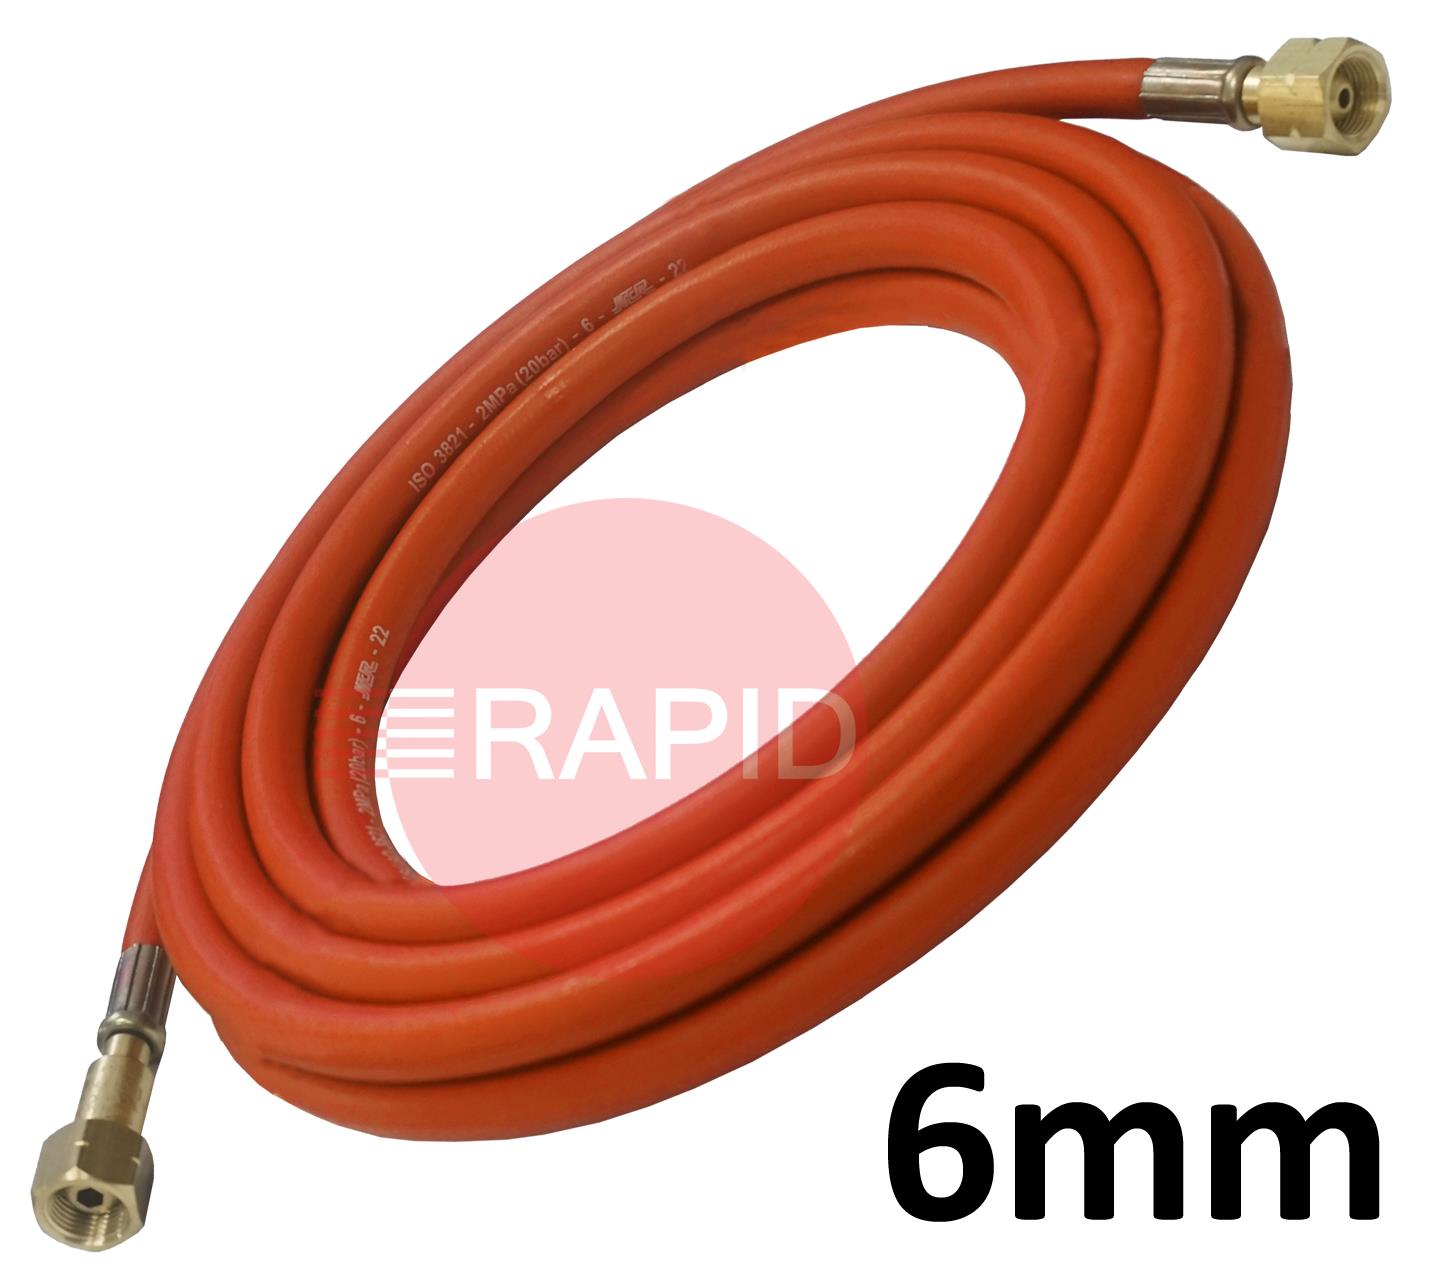 PROHOSE6MM  Fitted Propane Hose. 6mm Bore. G3/8 Check Valve & G3/8 Regulator Connection